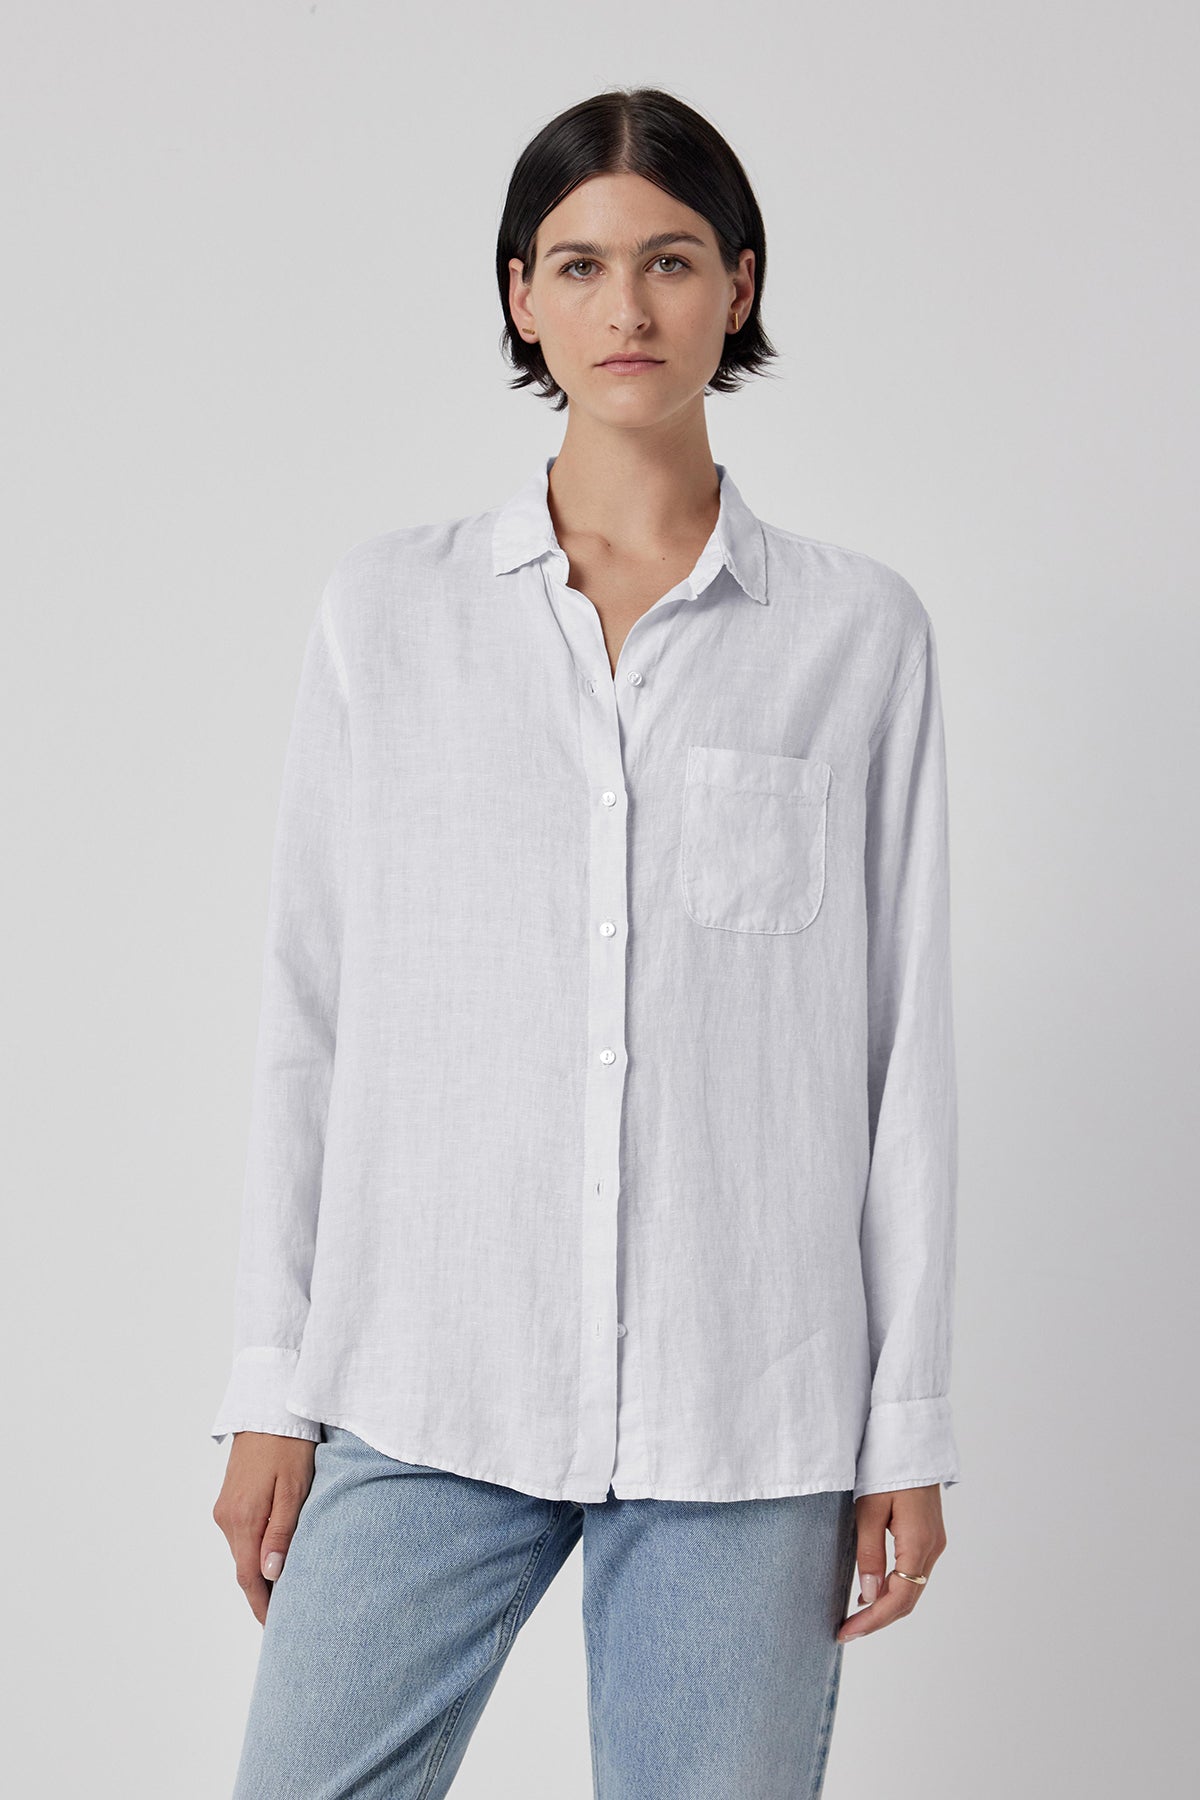   A woman wearing a Velvet by Jenny Graham Mulholland shirt in casual white linen with a scooped hemline and blue jeans stands against a grey background. 